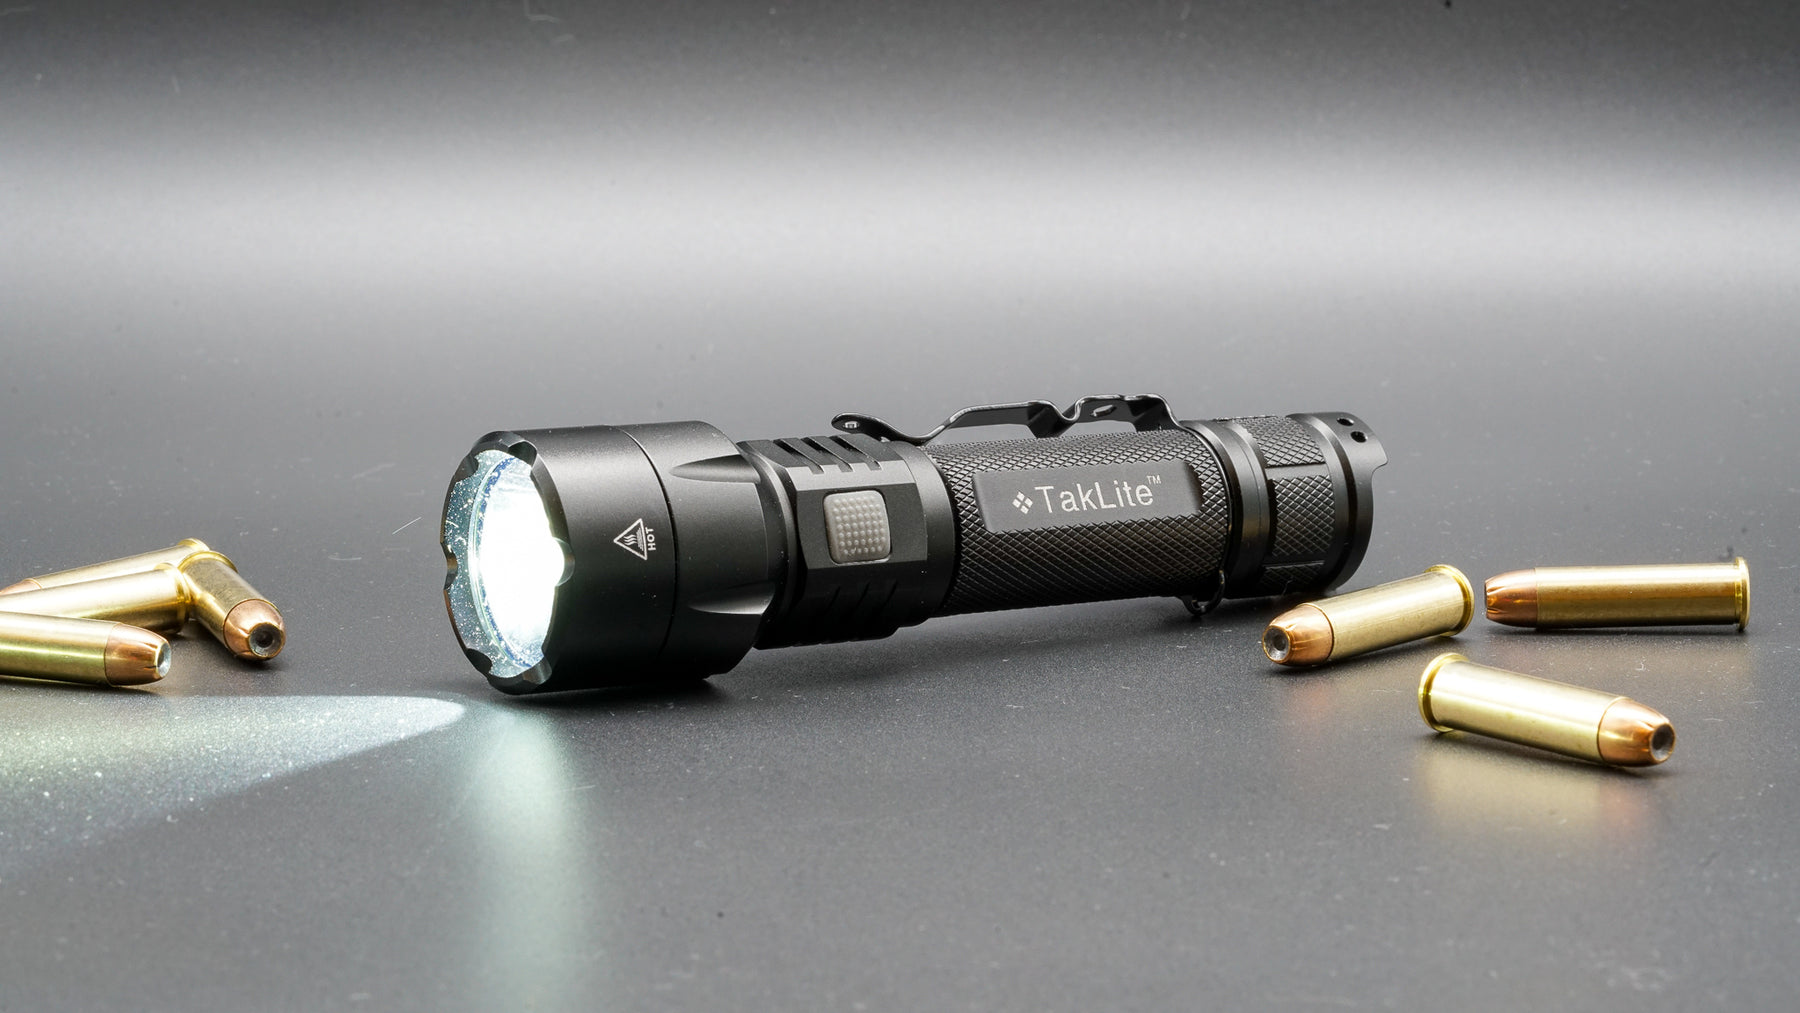 The TA-200 Flashlight Is Shaking Up The Industry